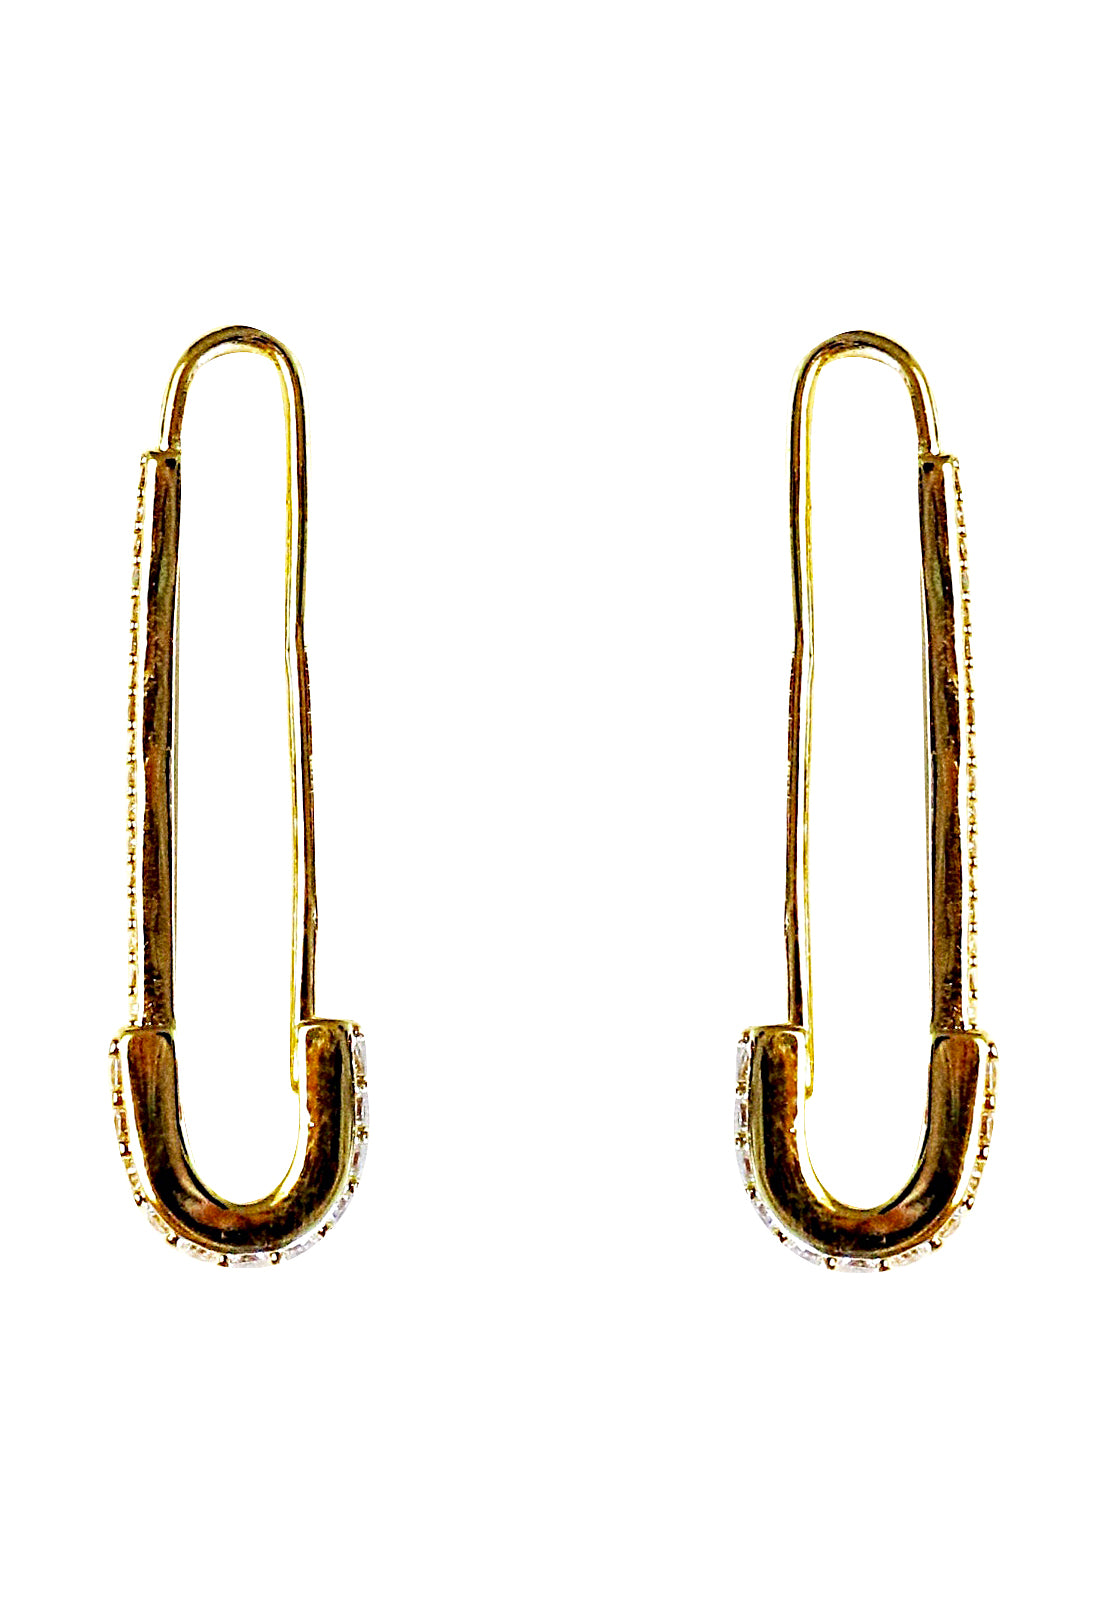 18k yellow gold-plated Pin earrings